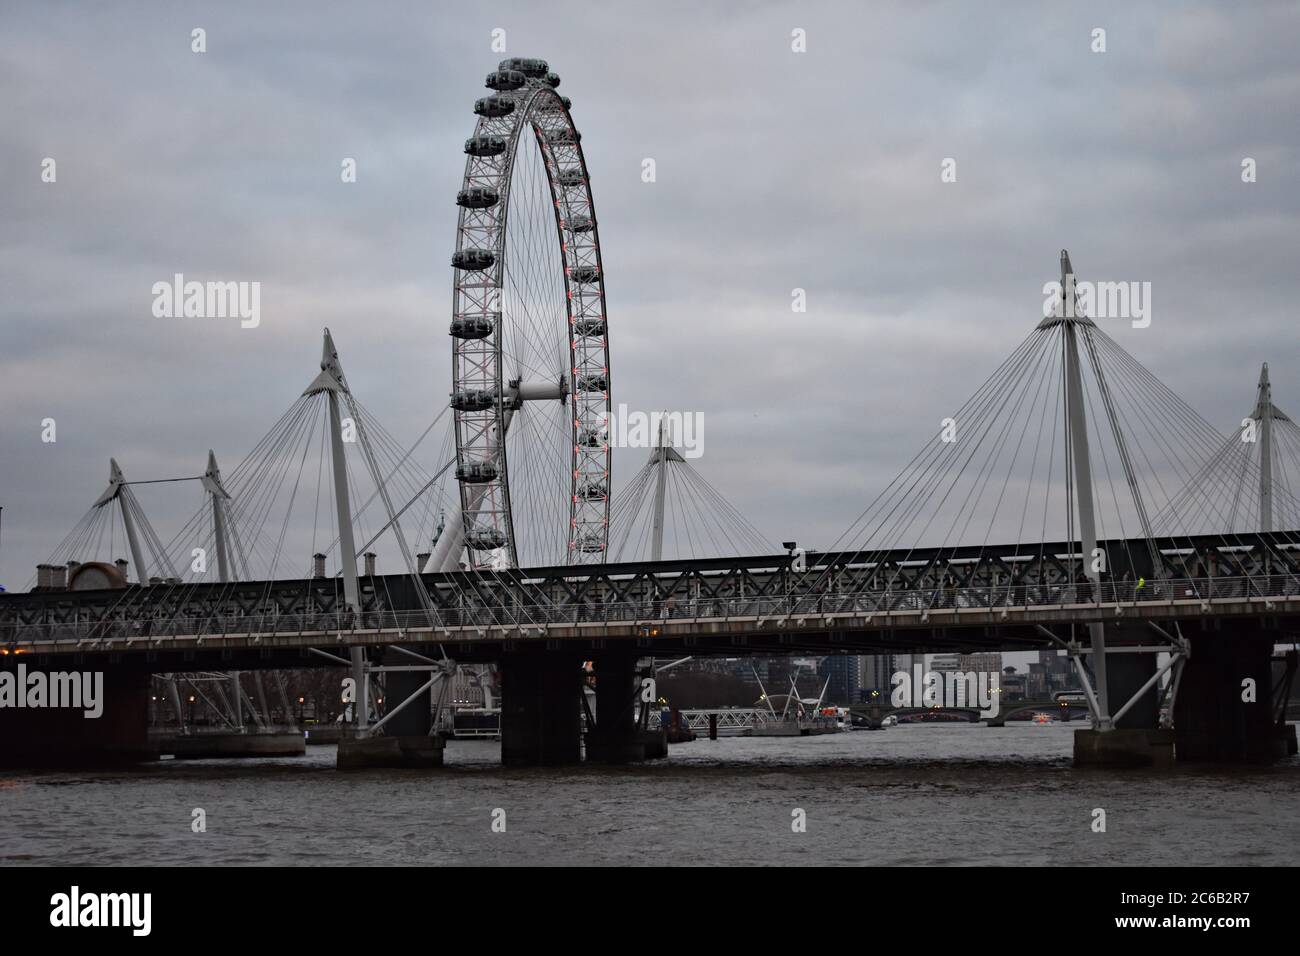 Golden Jubilee Bridge and Hungerford Bridge leading from Charing Cross over the River Thames in London. The London Eye appears above the bridges.  UK Stock Photo